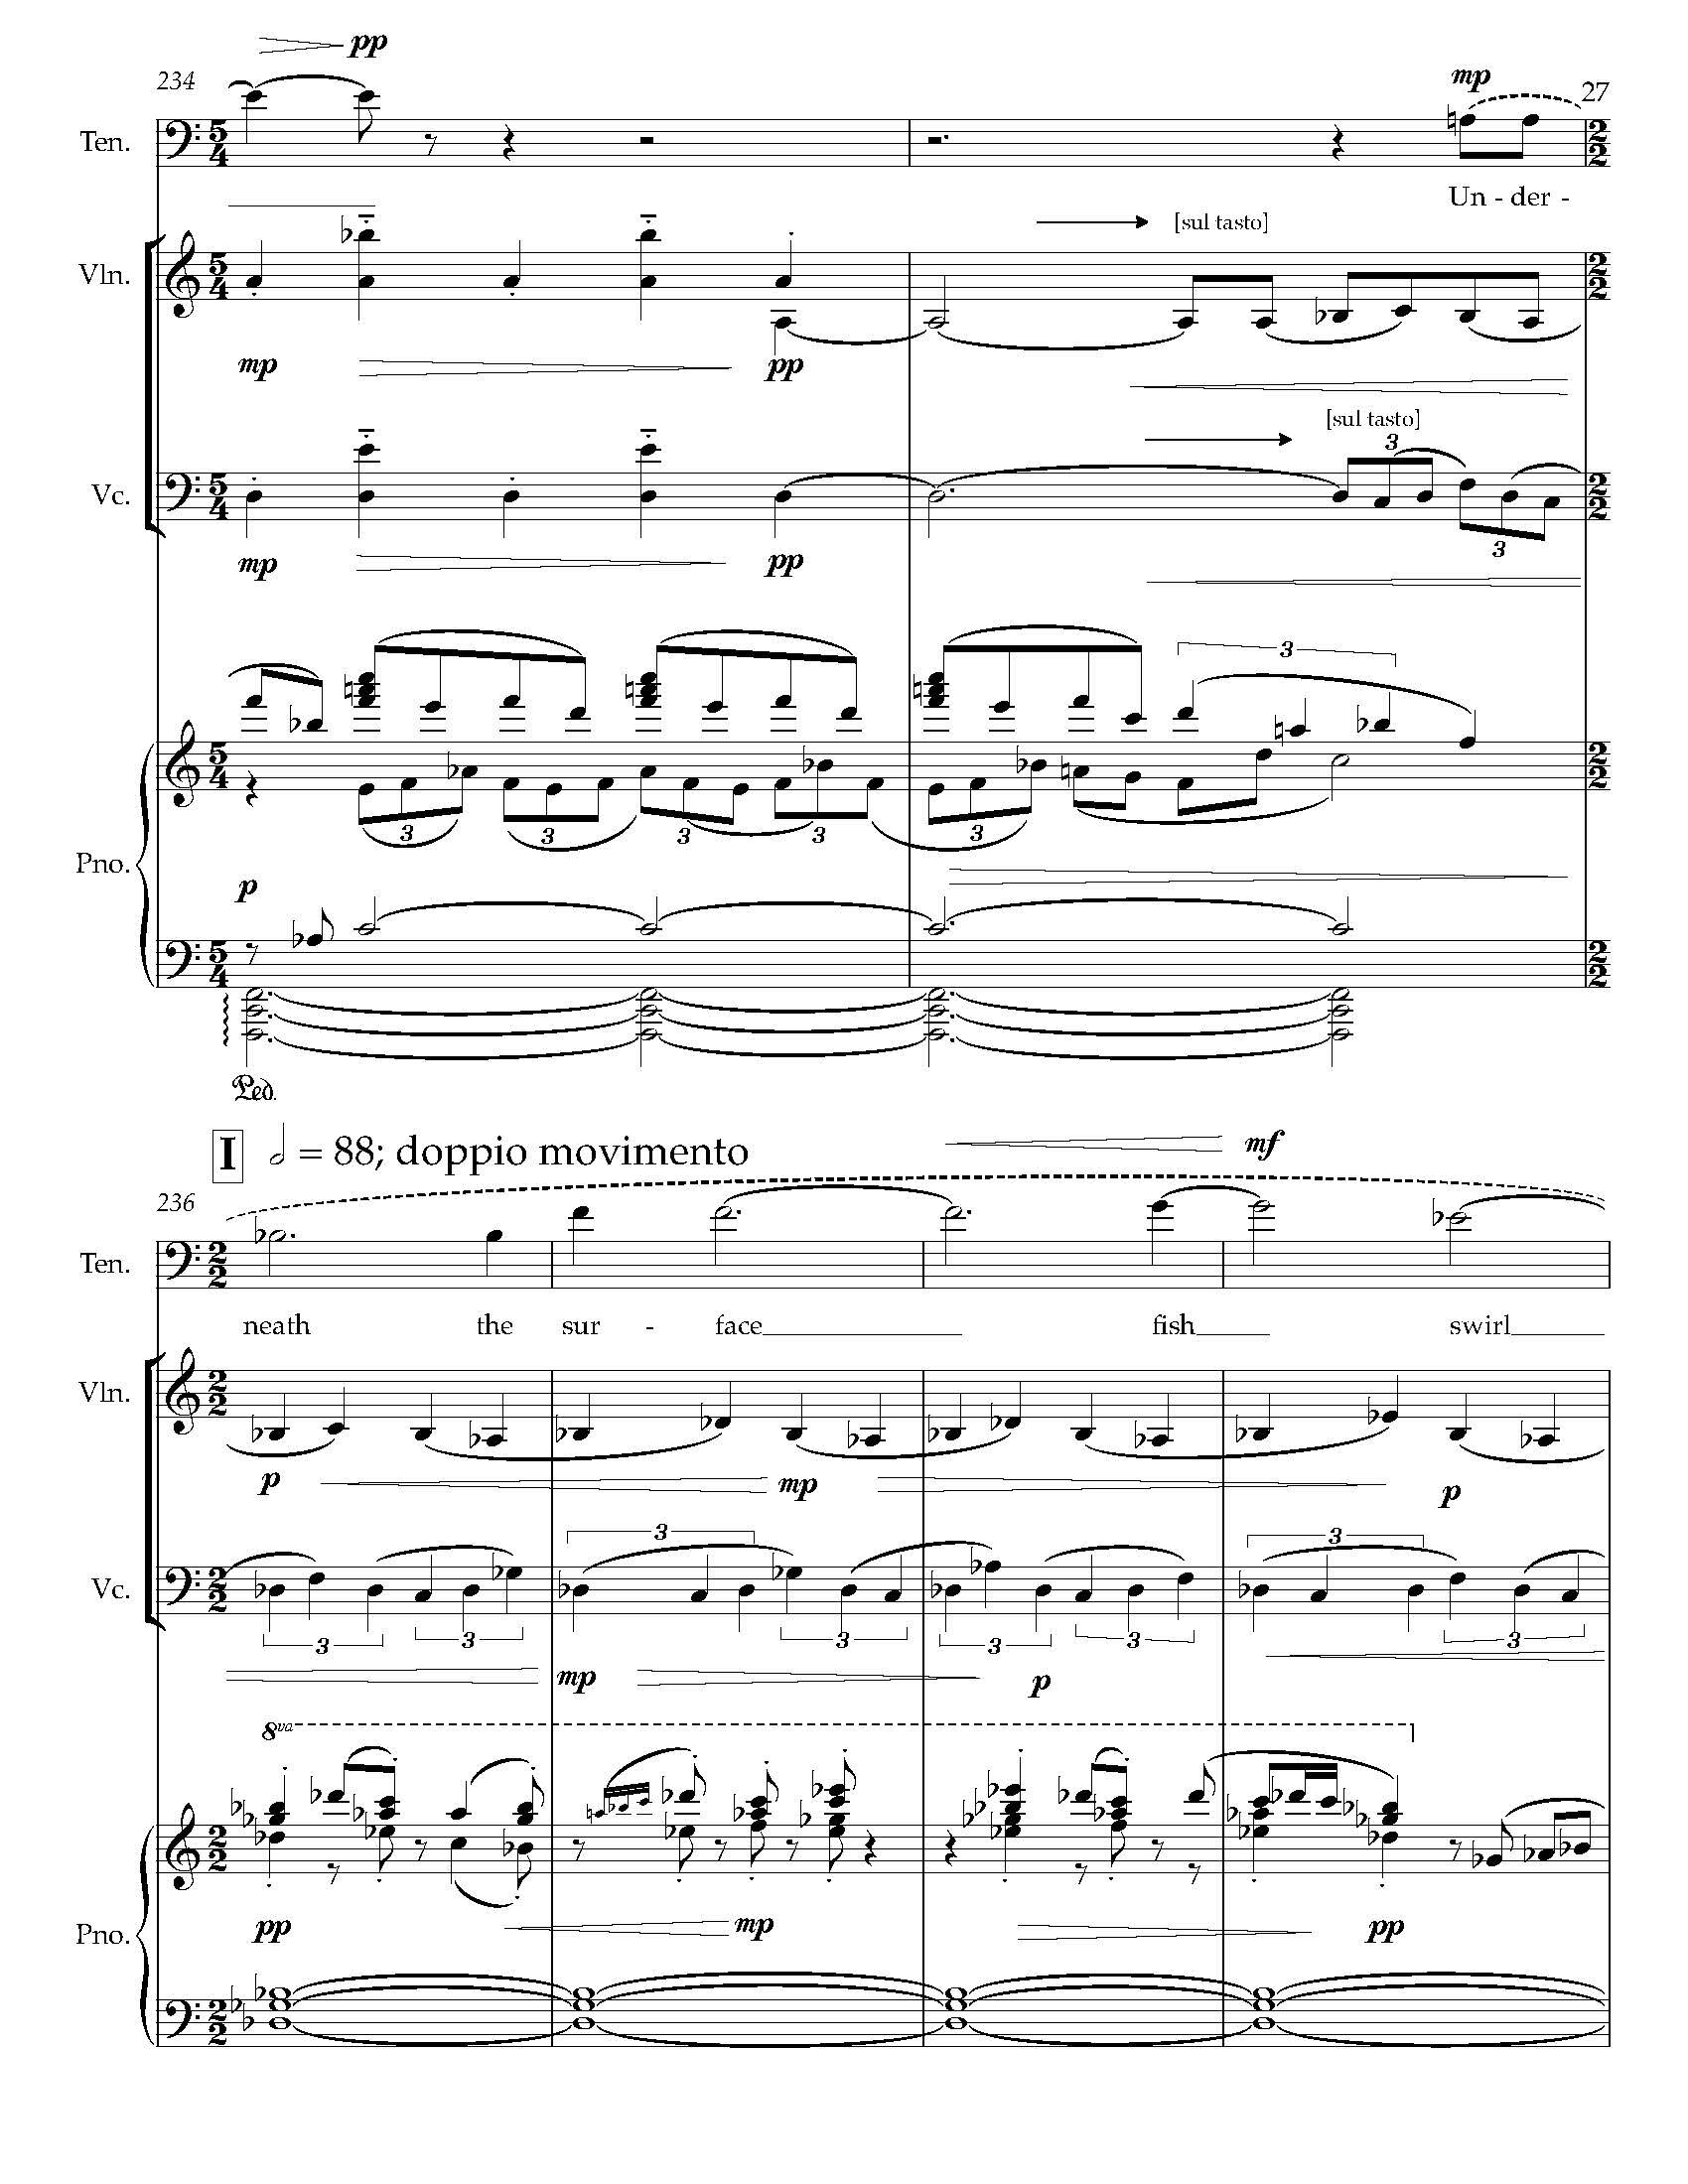 Gursky Songs - Complete Score_Page_35.jpg